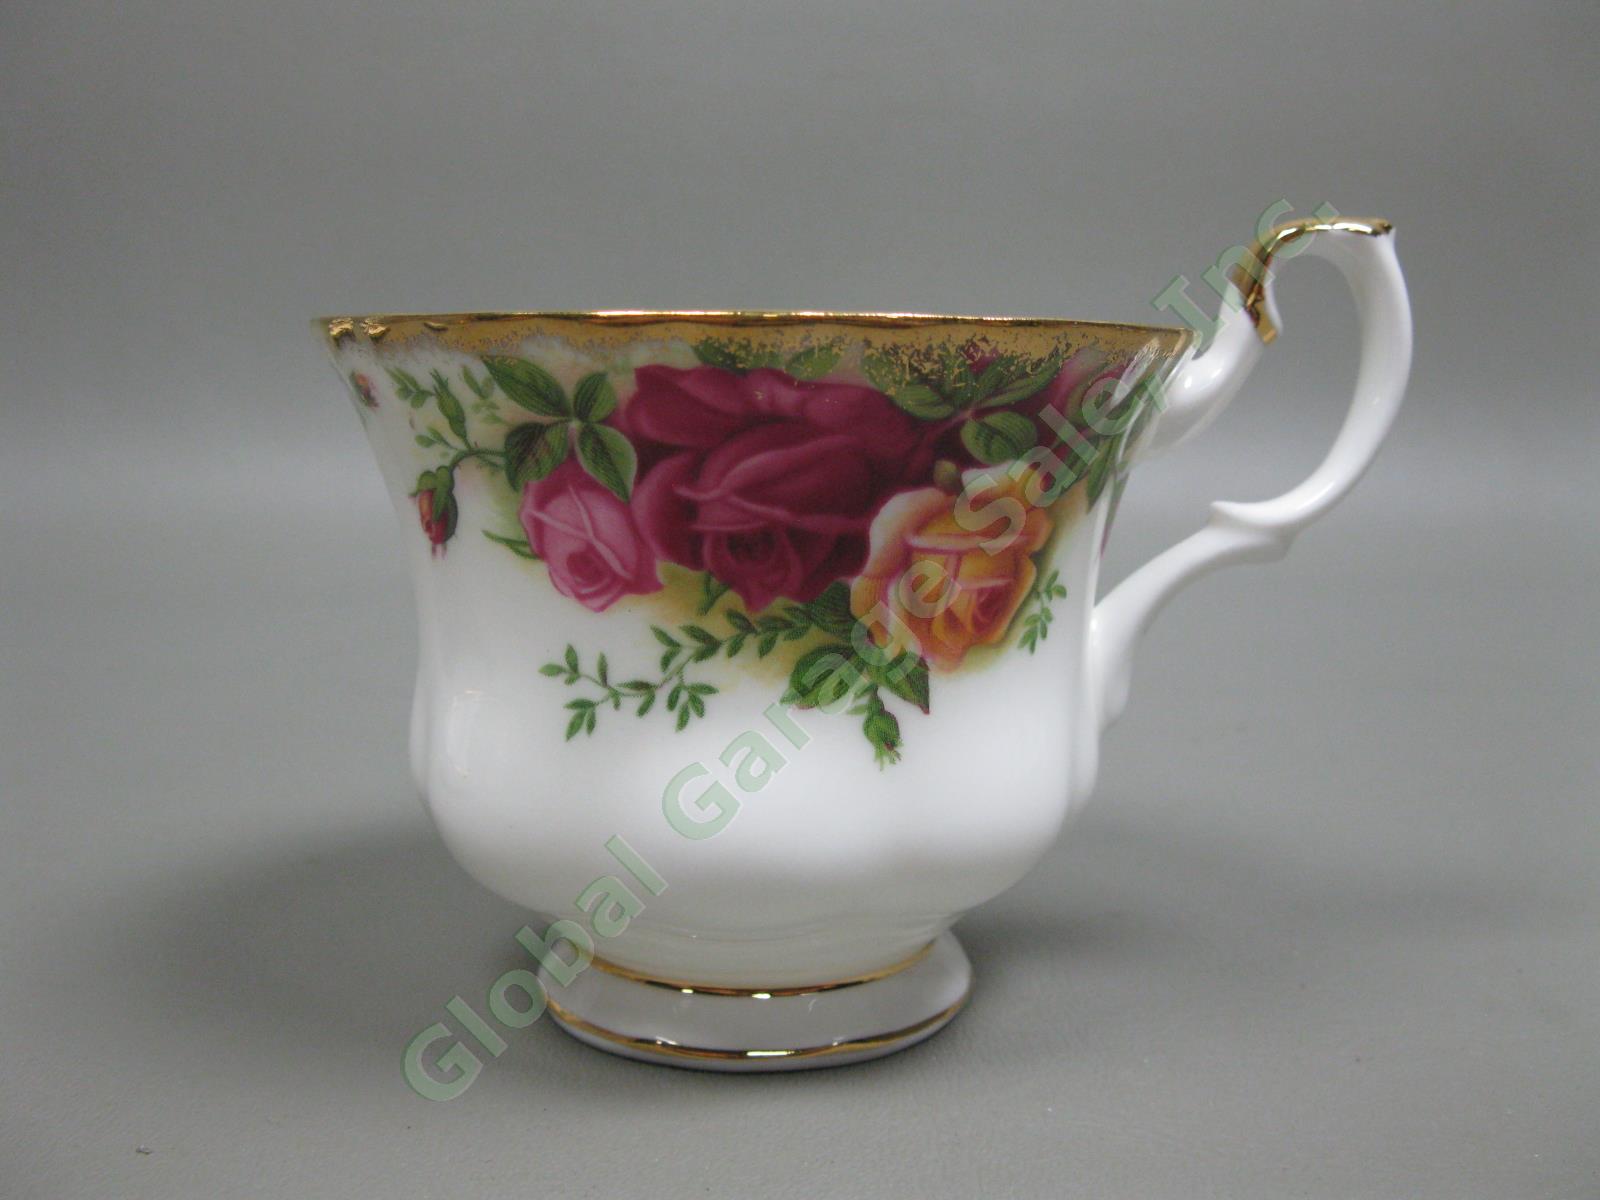 8 Royal Albert Old Country Roses Footed Tea Cup/Saucer Gold Trim Bone China Set 4